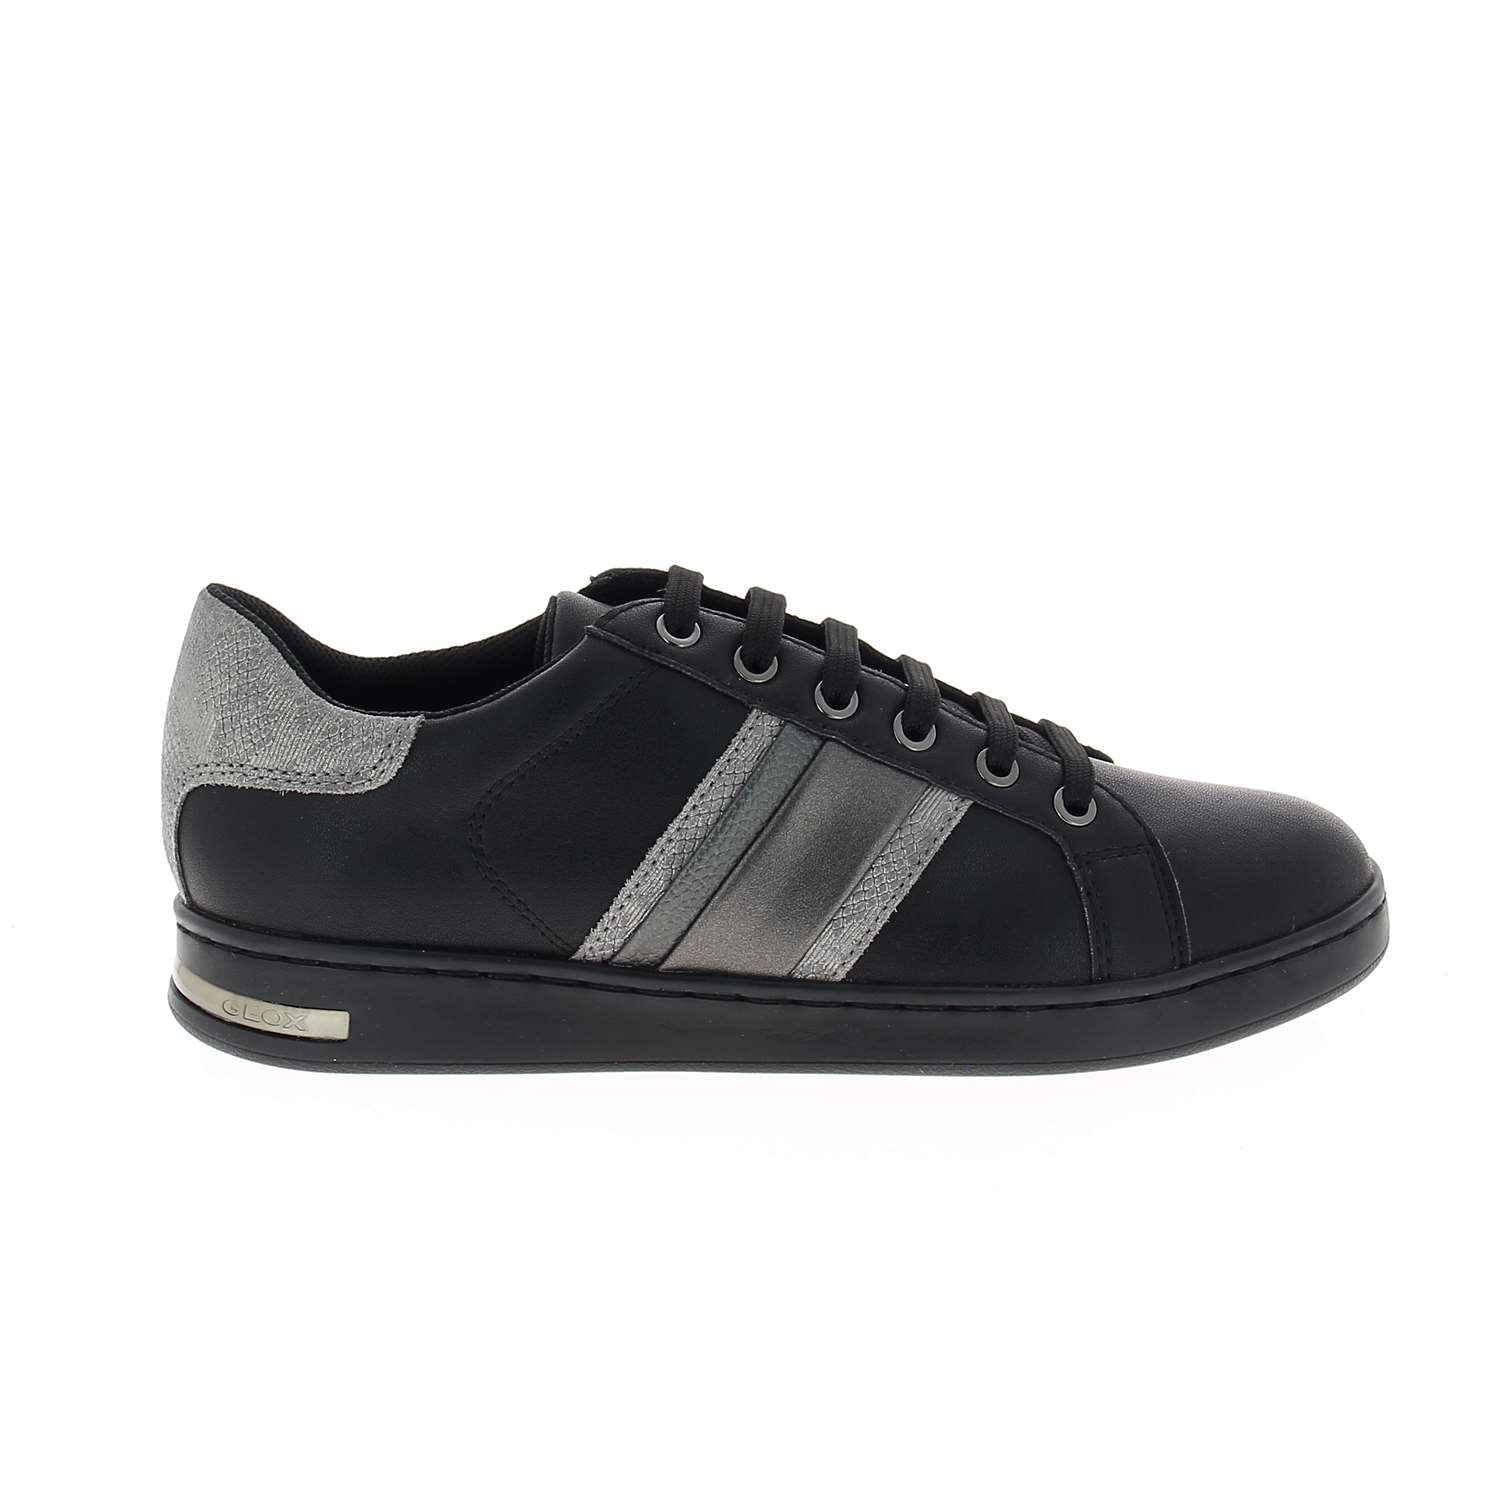 02 - JAYSEN - GEOX - Chaussures à lacets - Cuir